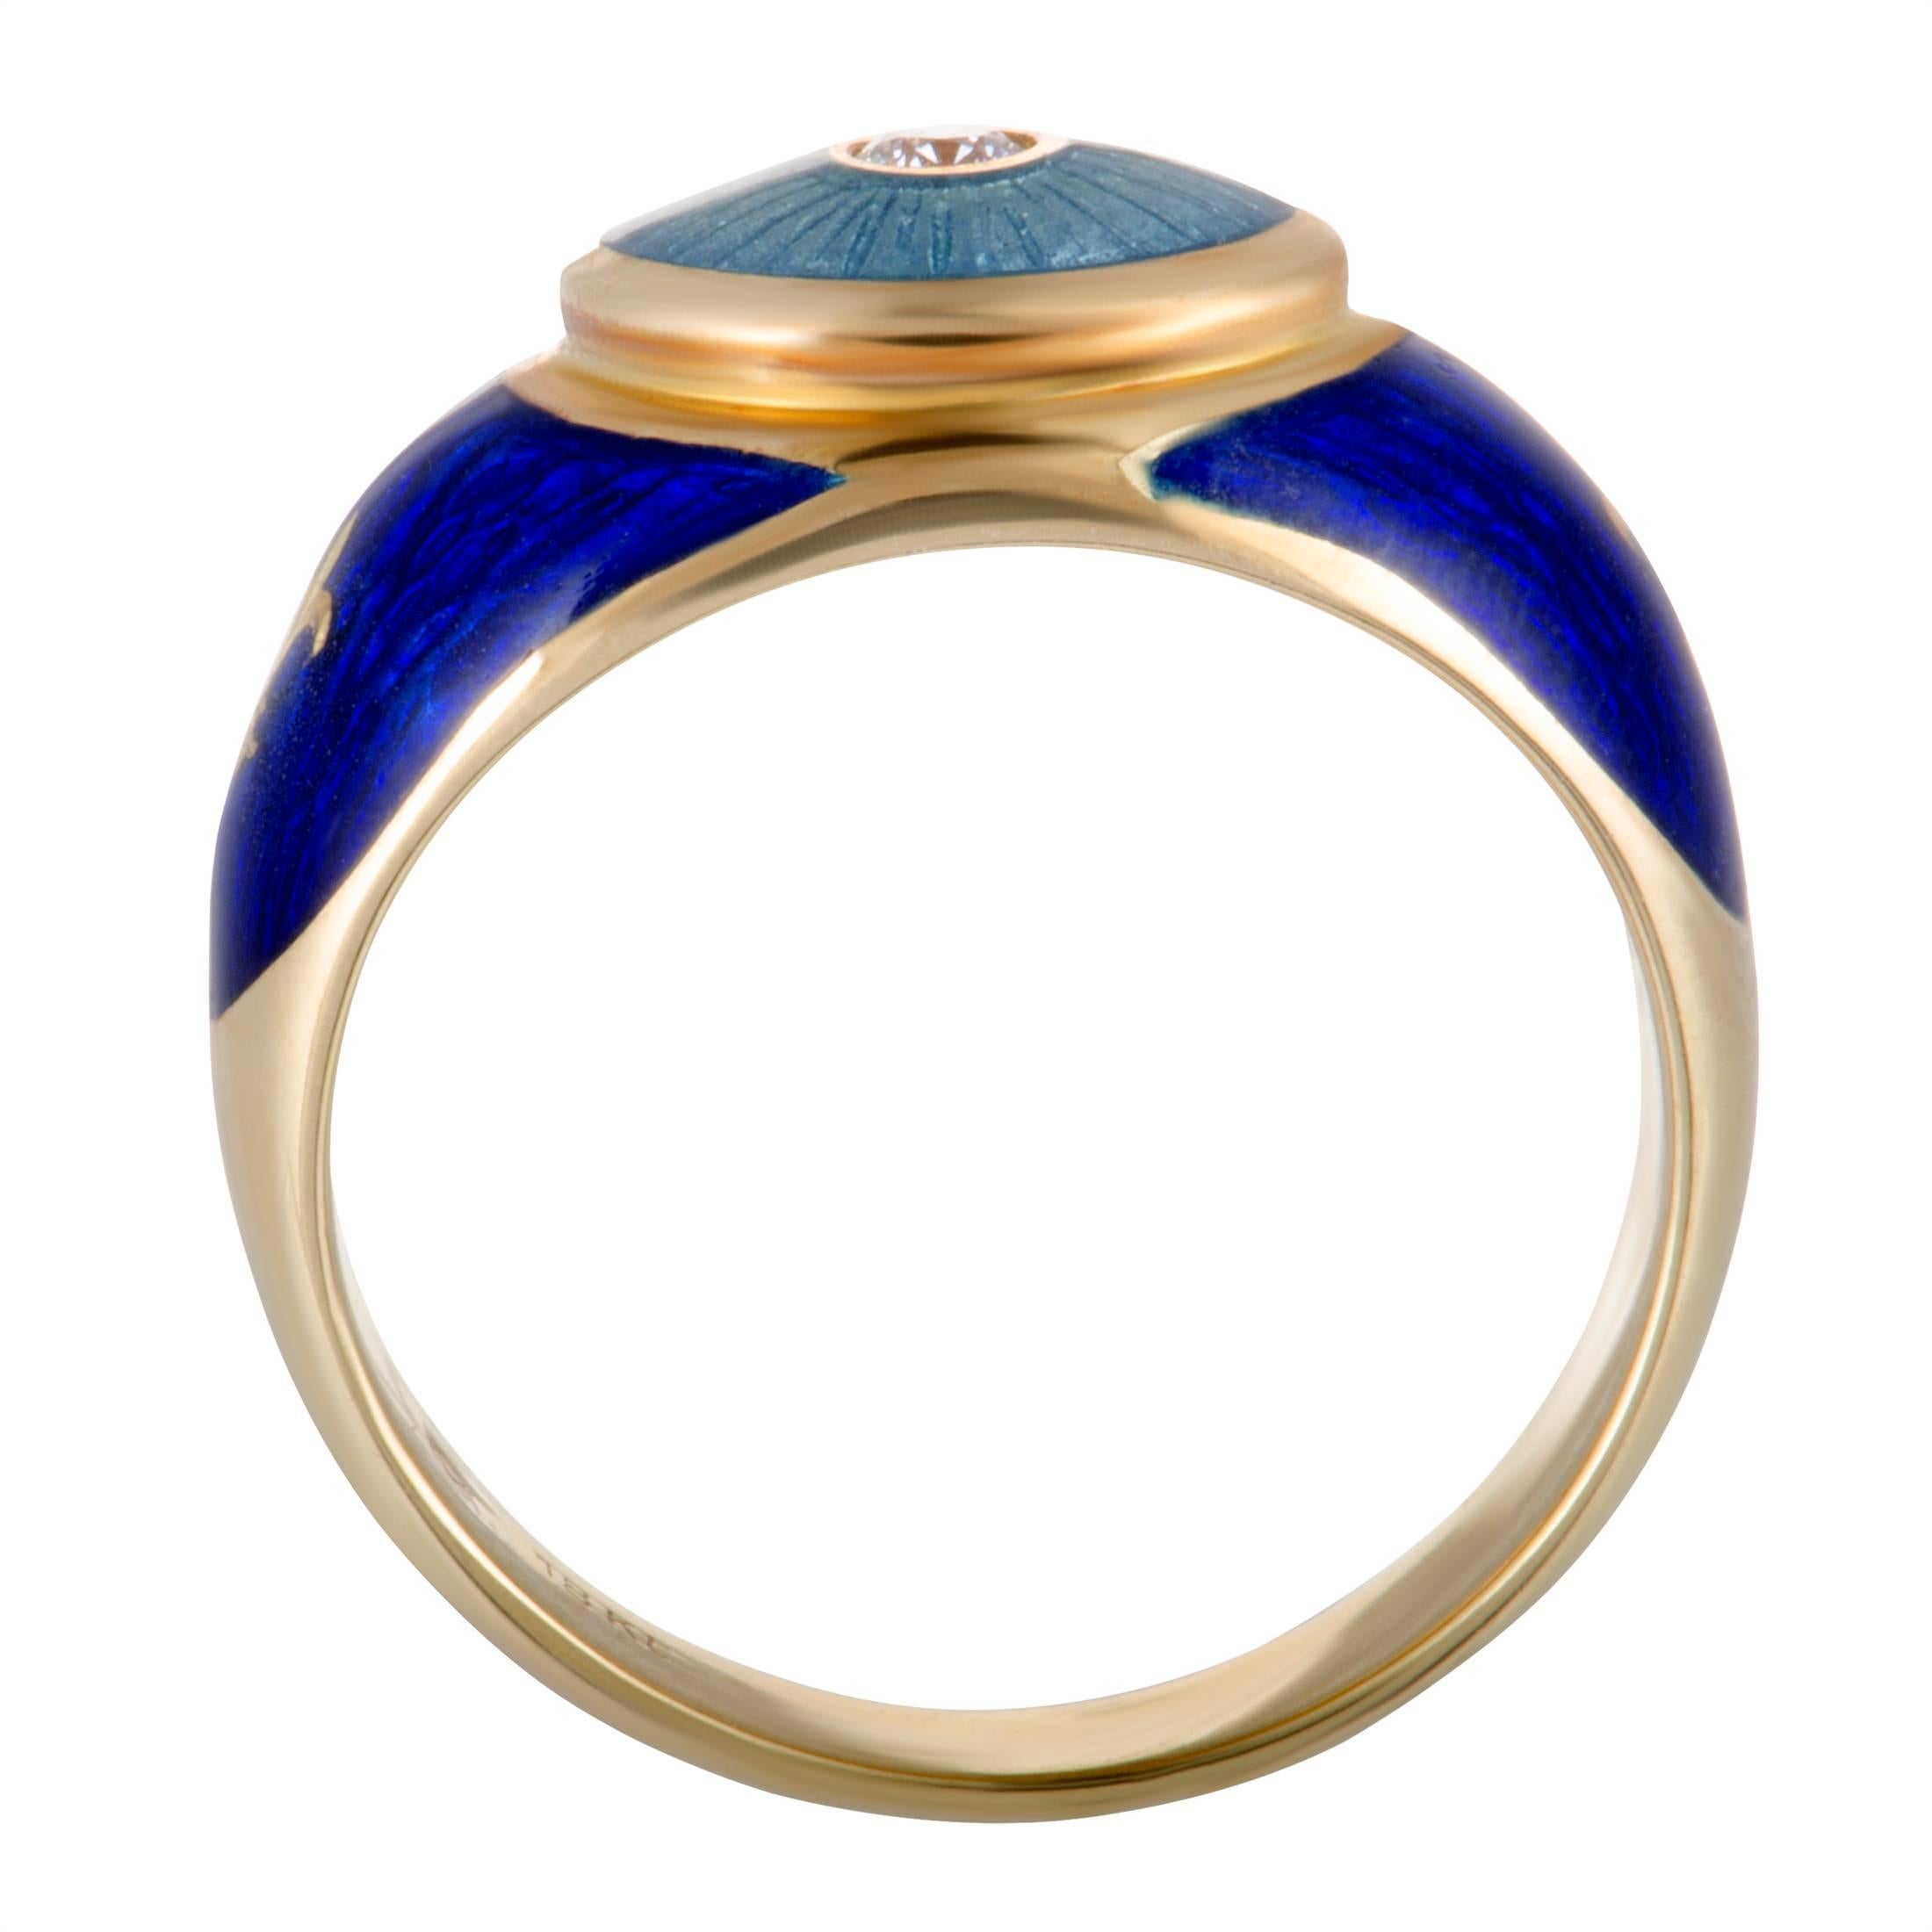 Fabergé stuns yet again with an incredibly luxurious-looking piece with this magnificent ring made of classy 18K yellow gold. The ring is decorated with captivating enamel and a gorgeous diamond stone.
Ring Size: 6.75
Ring Top Dimensions: 20mm x